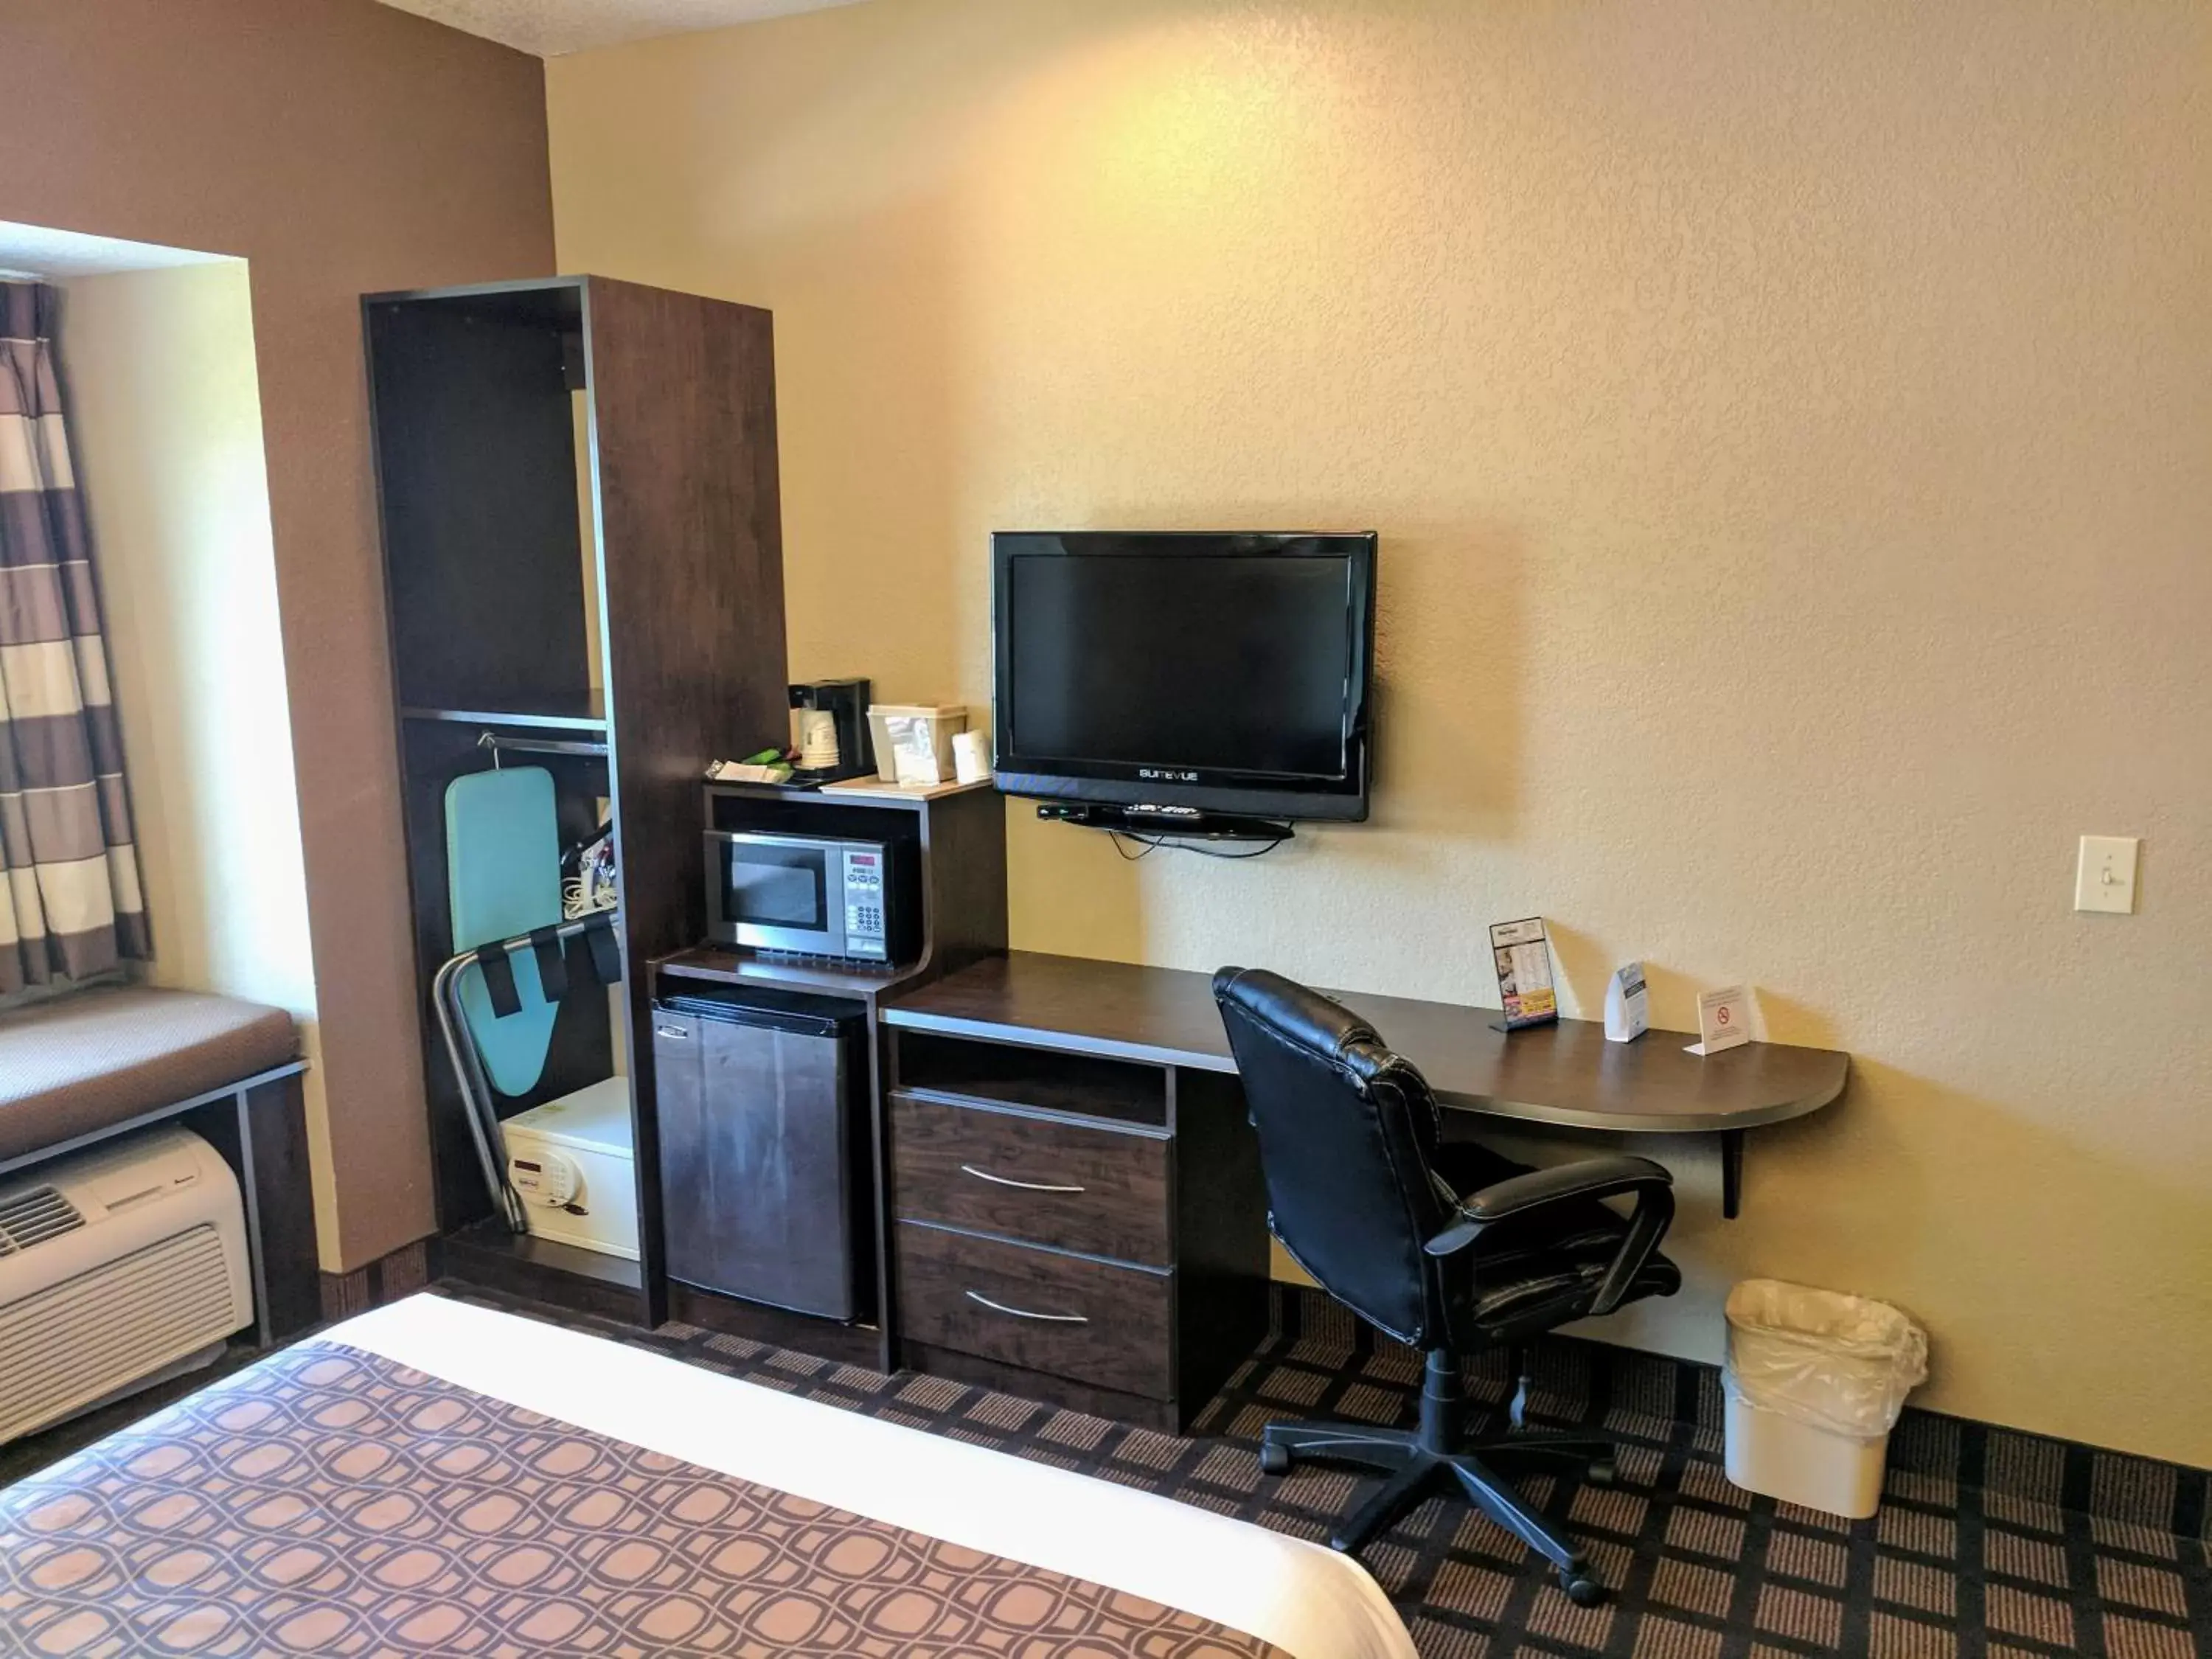 Area and facilities, TV/Entertainment Center in Microtel Inn and Suites Montgomery